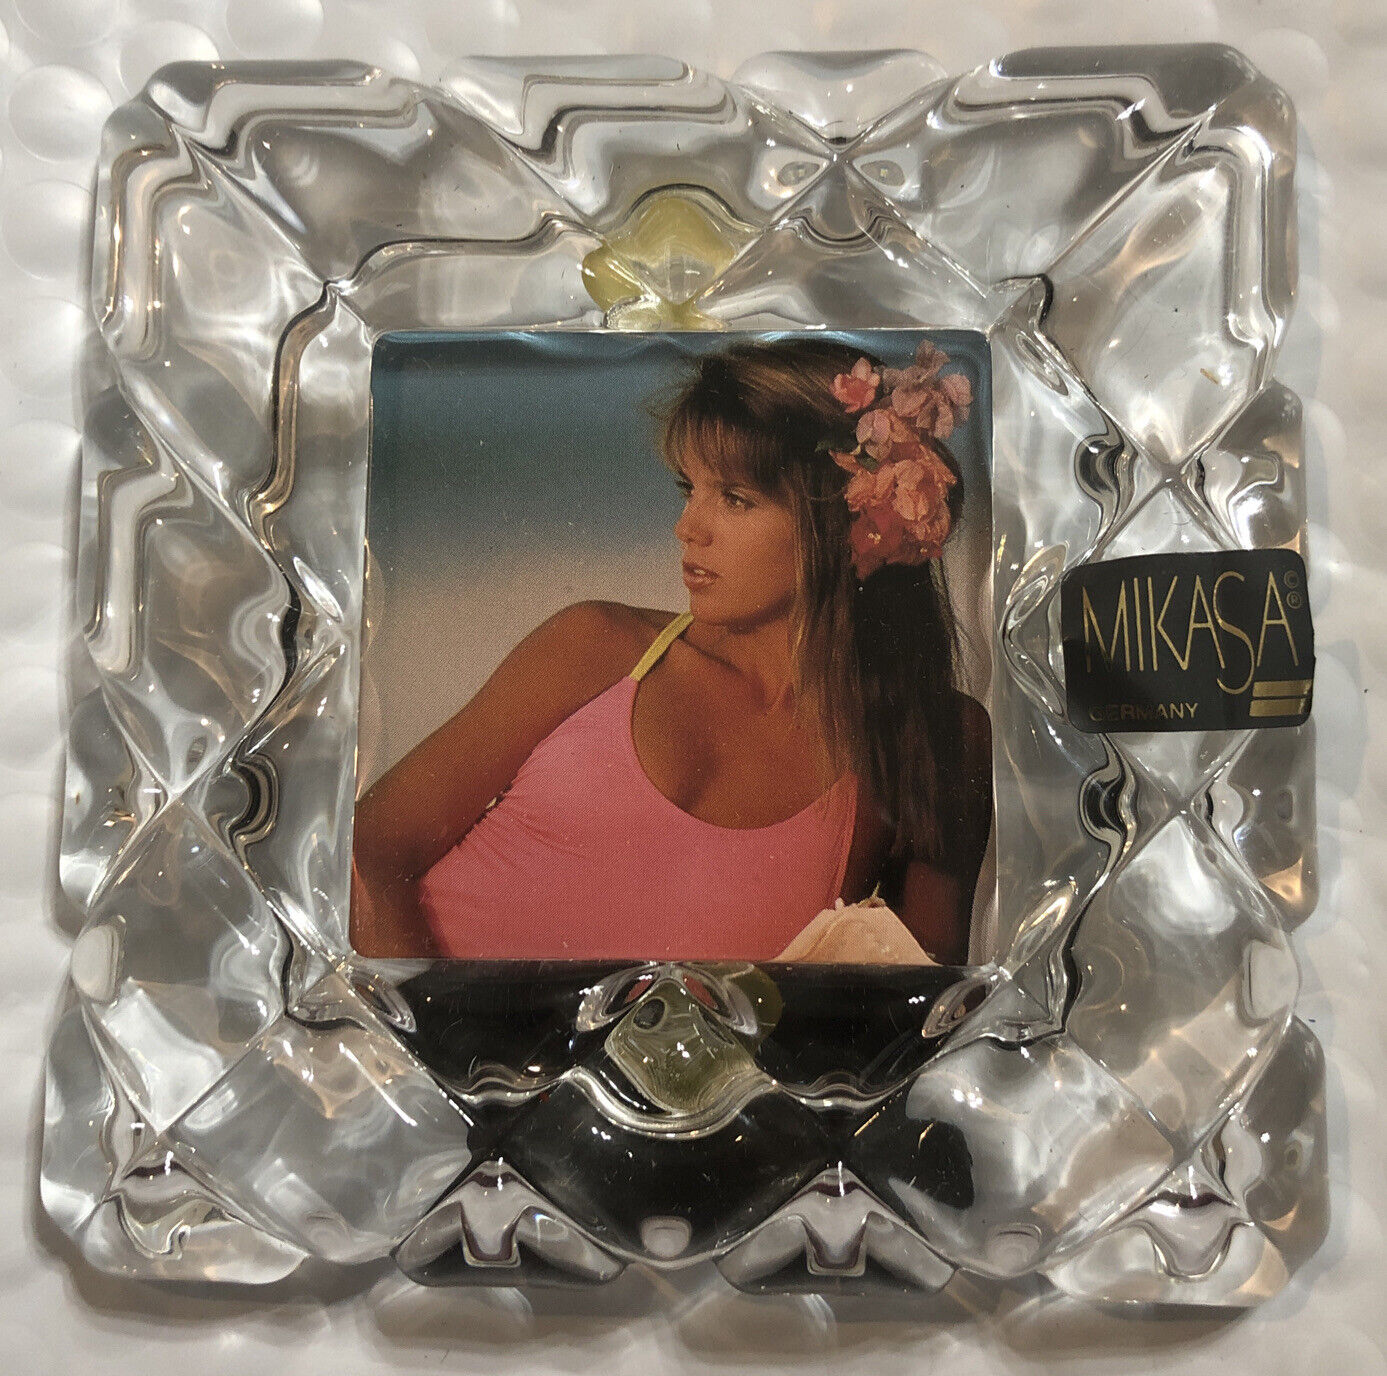 Mikasa Crystal Picture Photo Frame Holds 2” x 2” Photo New